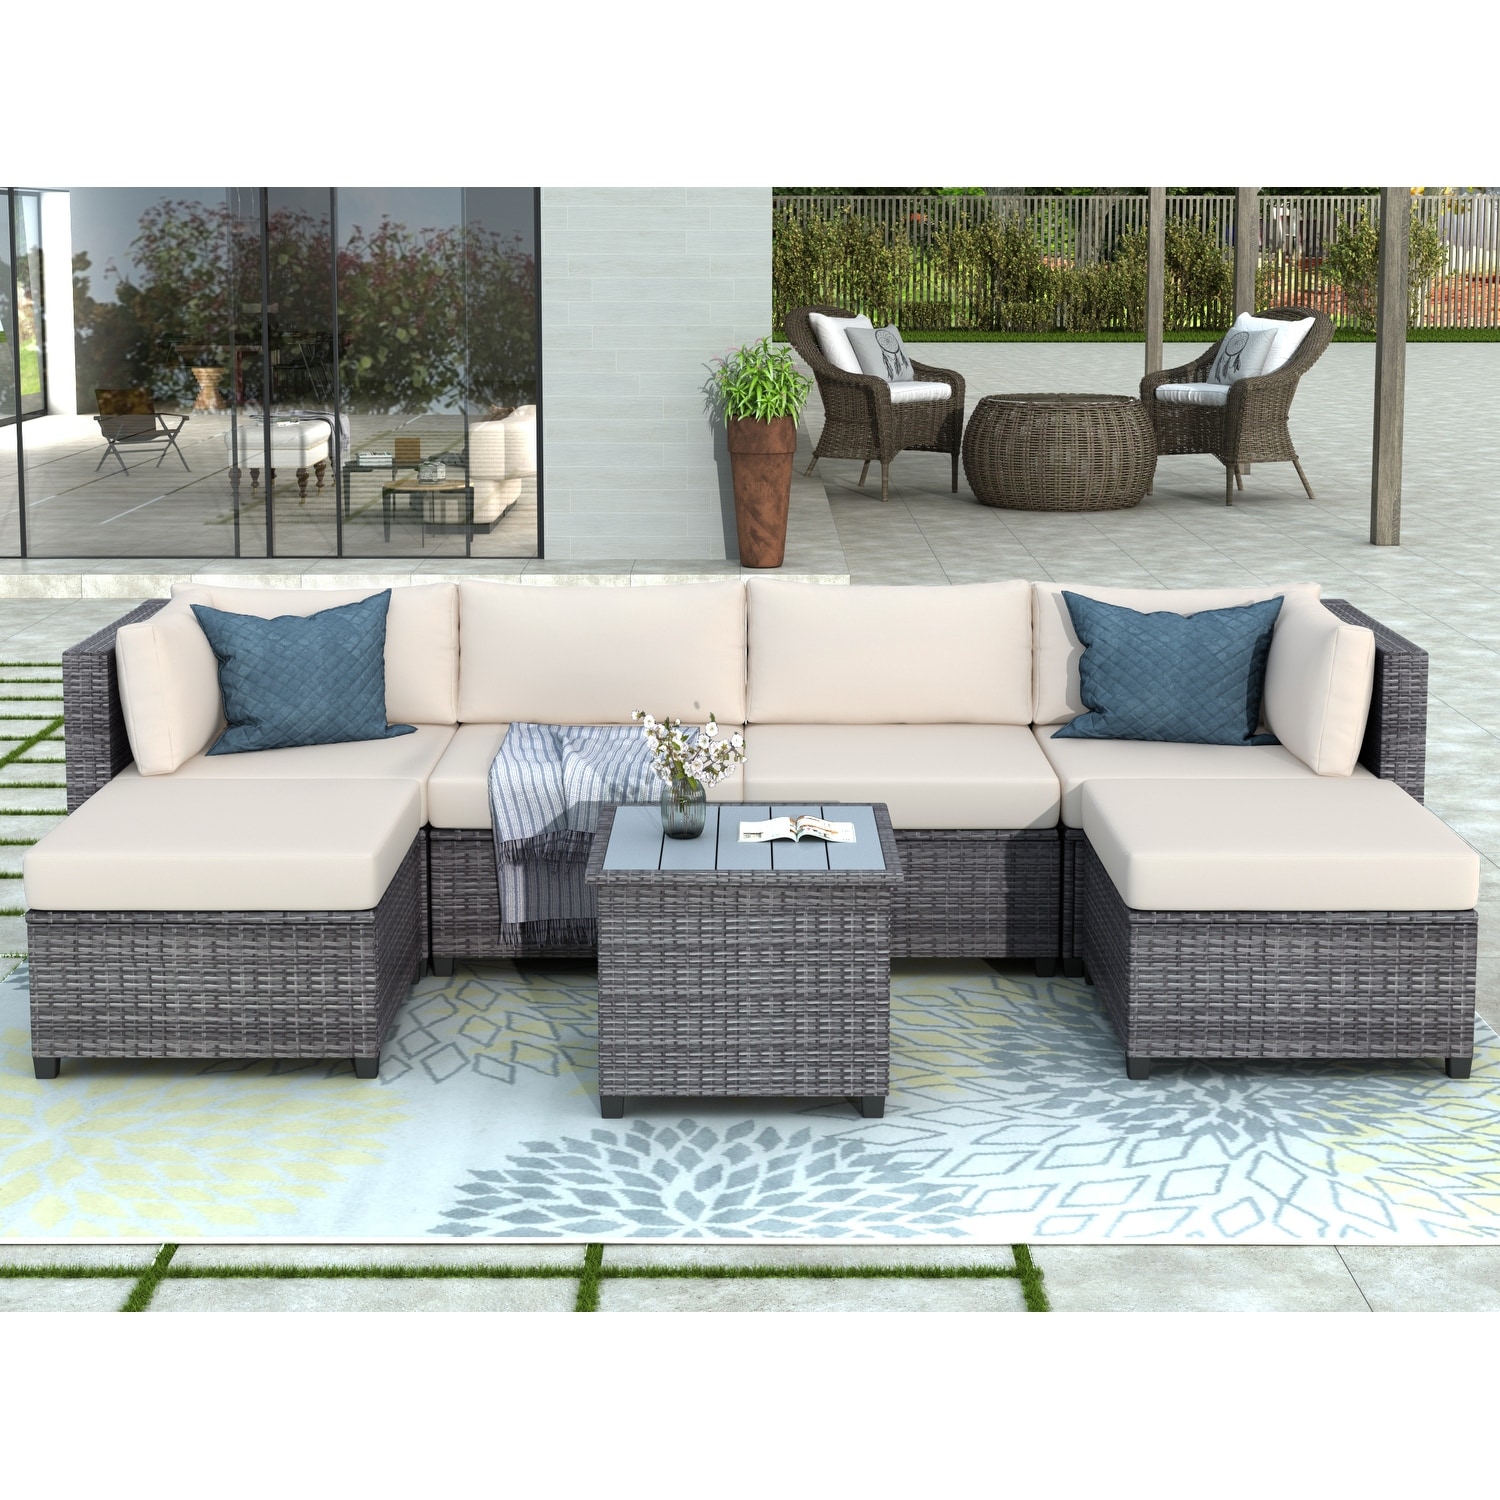 7-piece Rattan Outdoor Furniture Set  Sectional Sofa With Cushions And Coffee Table  Resistant To Water And Uv Rays